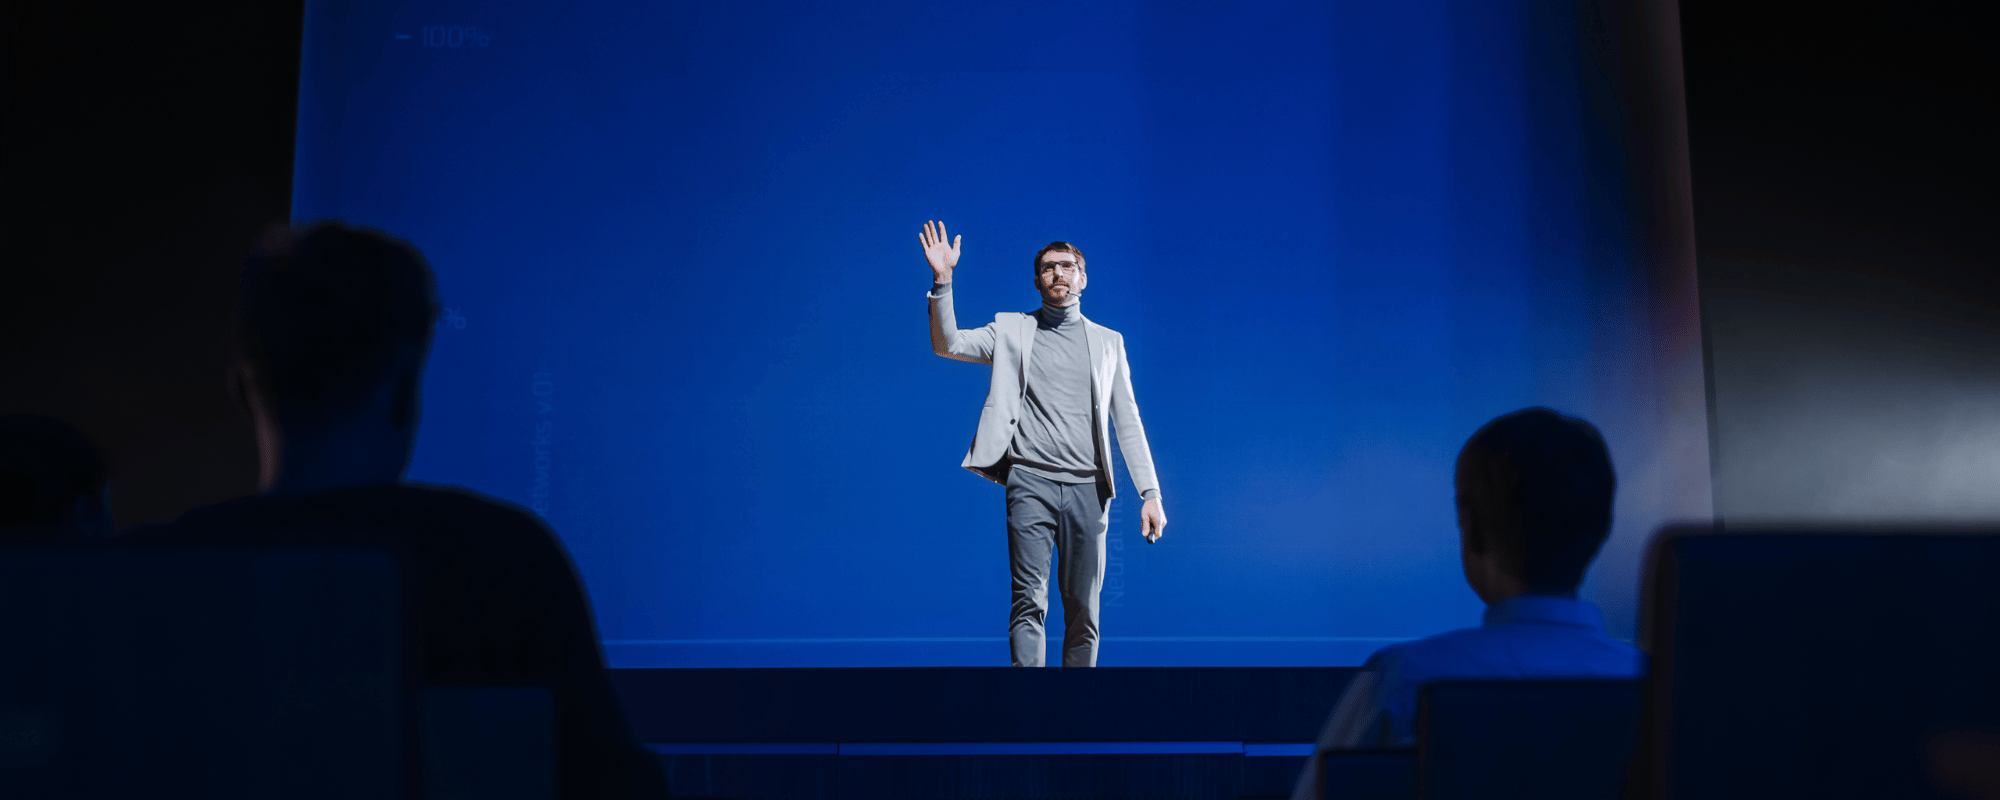 Man standing on stage hosting a keynote while waving to the audience